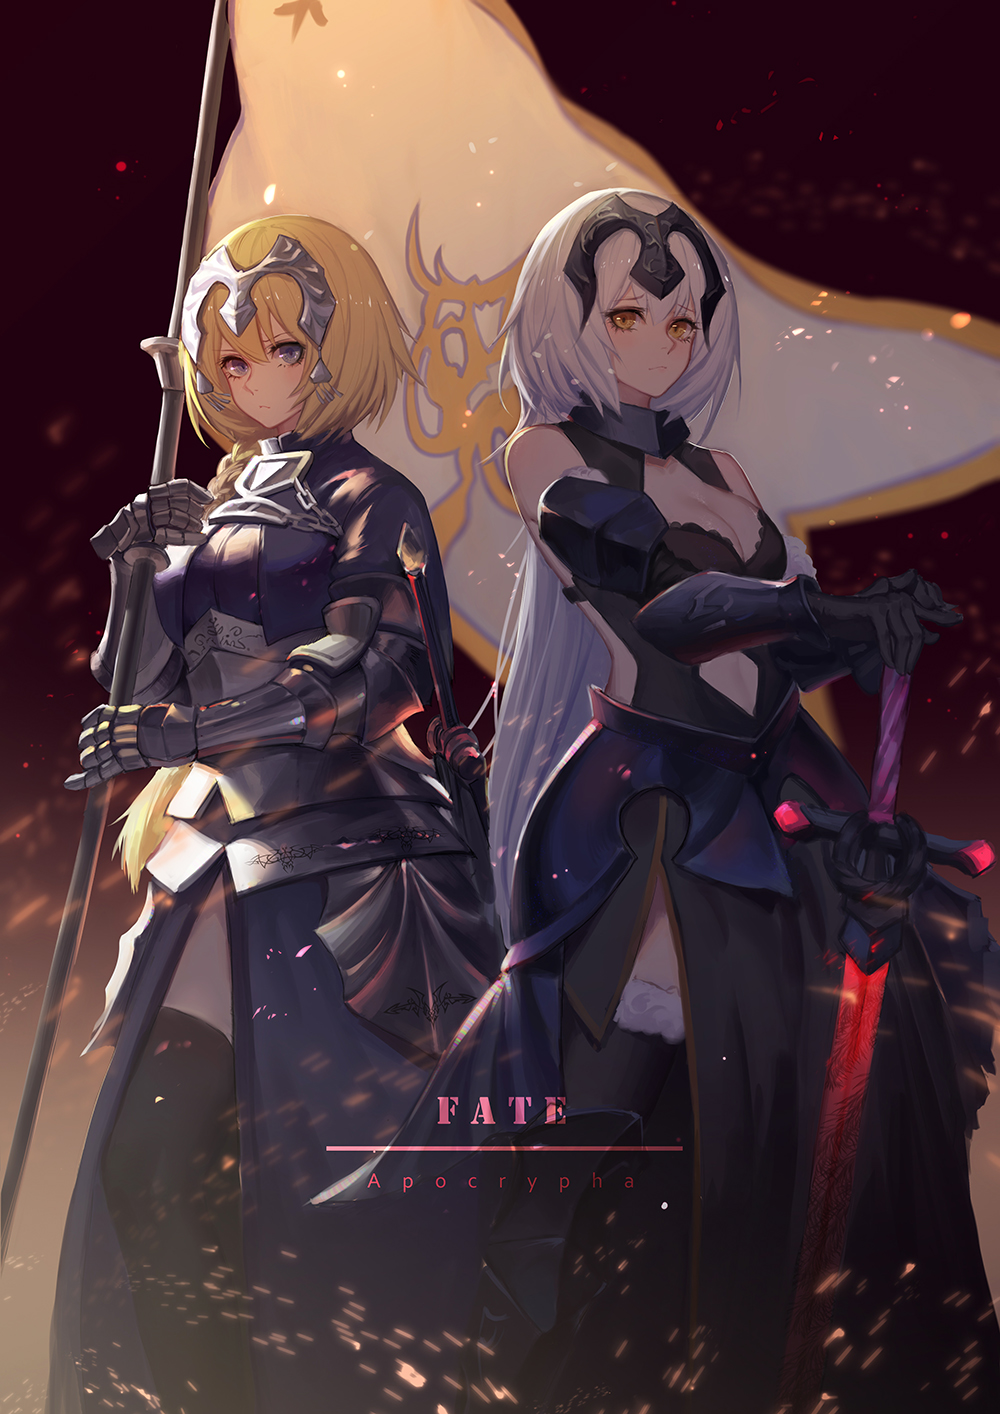 Anime 1000x1414 Fate/Apocrypha  Fate/Grand Order Fate series big boobs no bra armored woman female warrior women with swords 2D anime girls blue dress black dress cleavage belly thighs black legwear long hair white hair flag chains bare shoulders ecchi blushing open dress gauntlets belly button Jeanne d'Arc (Fate) Ruler (Fate/Apocrypha) Jeanne (Alter) (Fate/Grand Order) blurred braids sheath looking at viewer blue eyes yellow eyes bangs fan art banner anime portrait display Pre curvy blonde